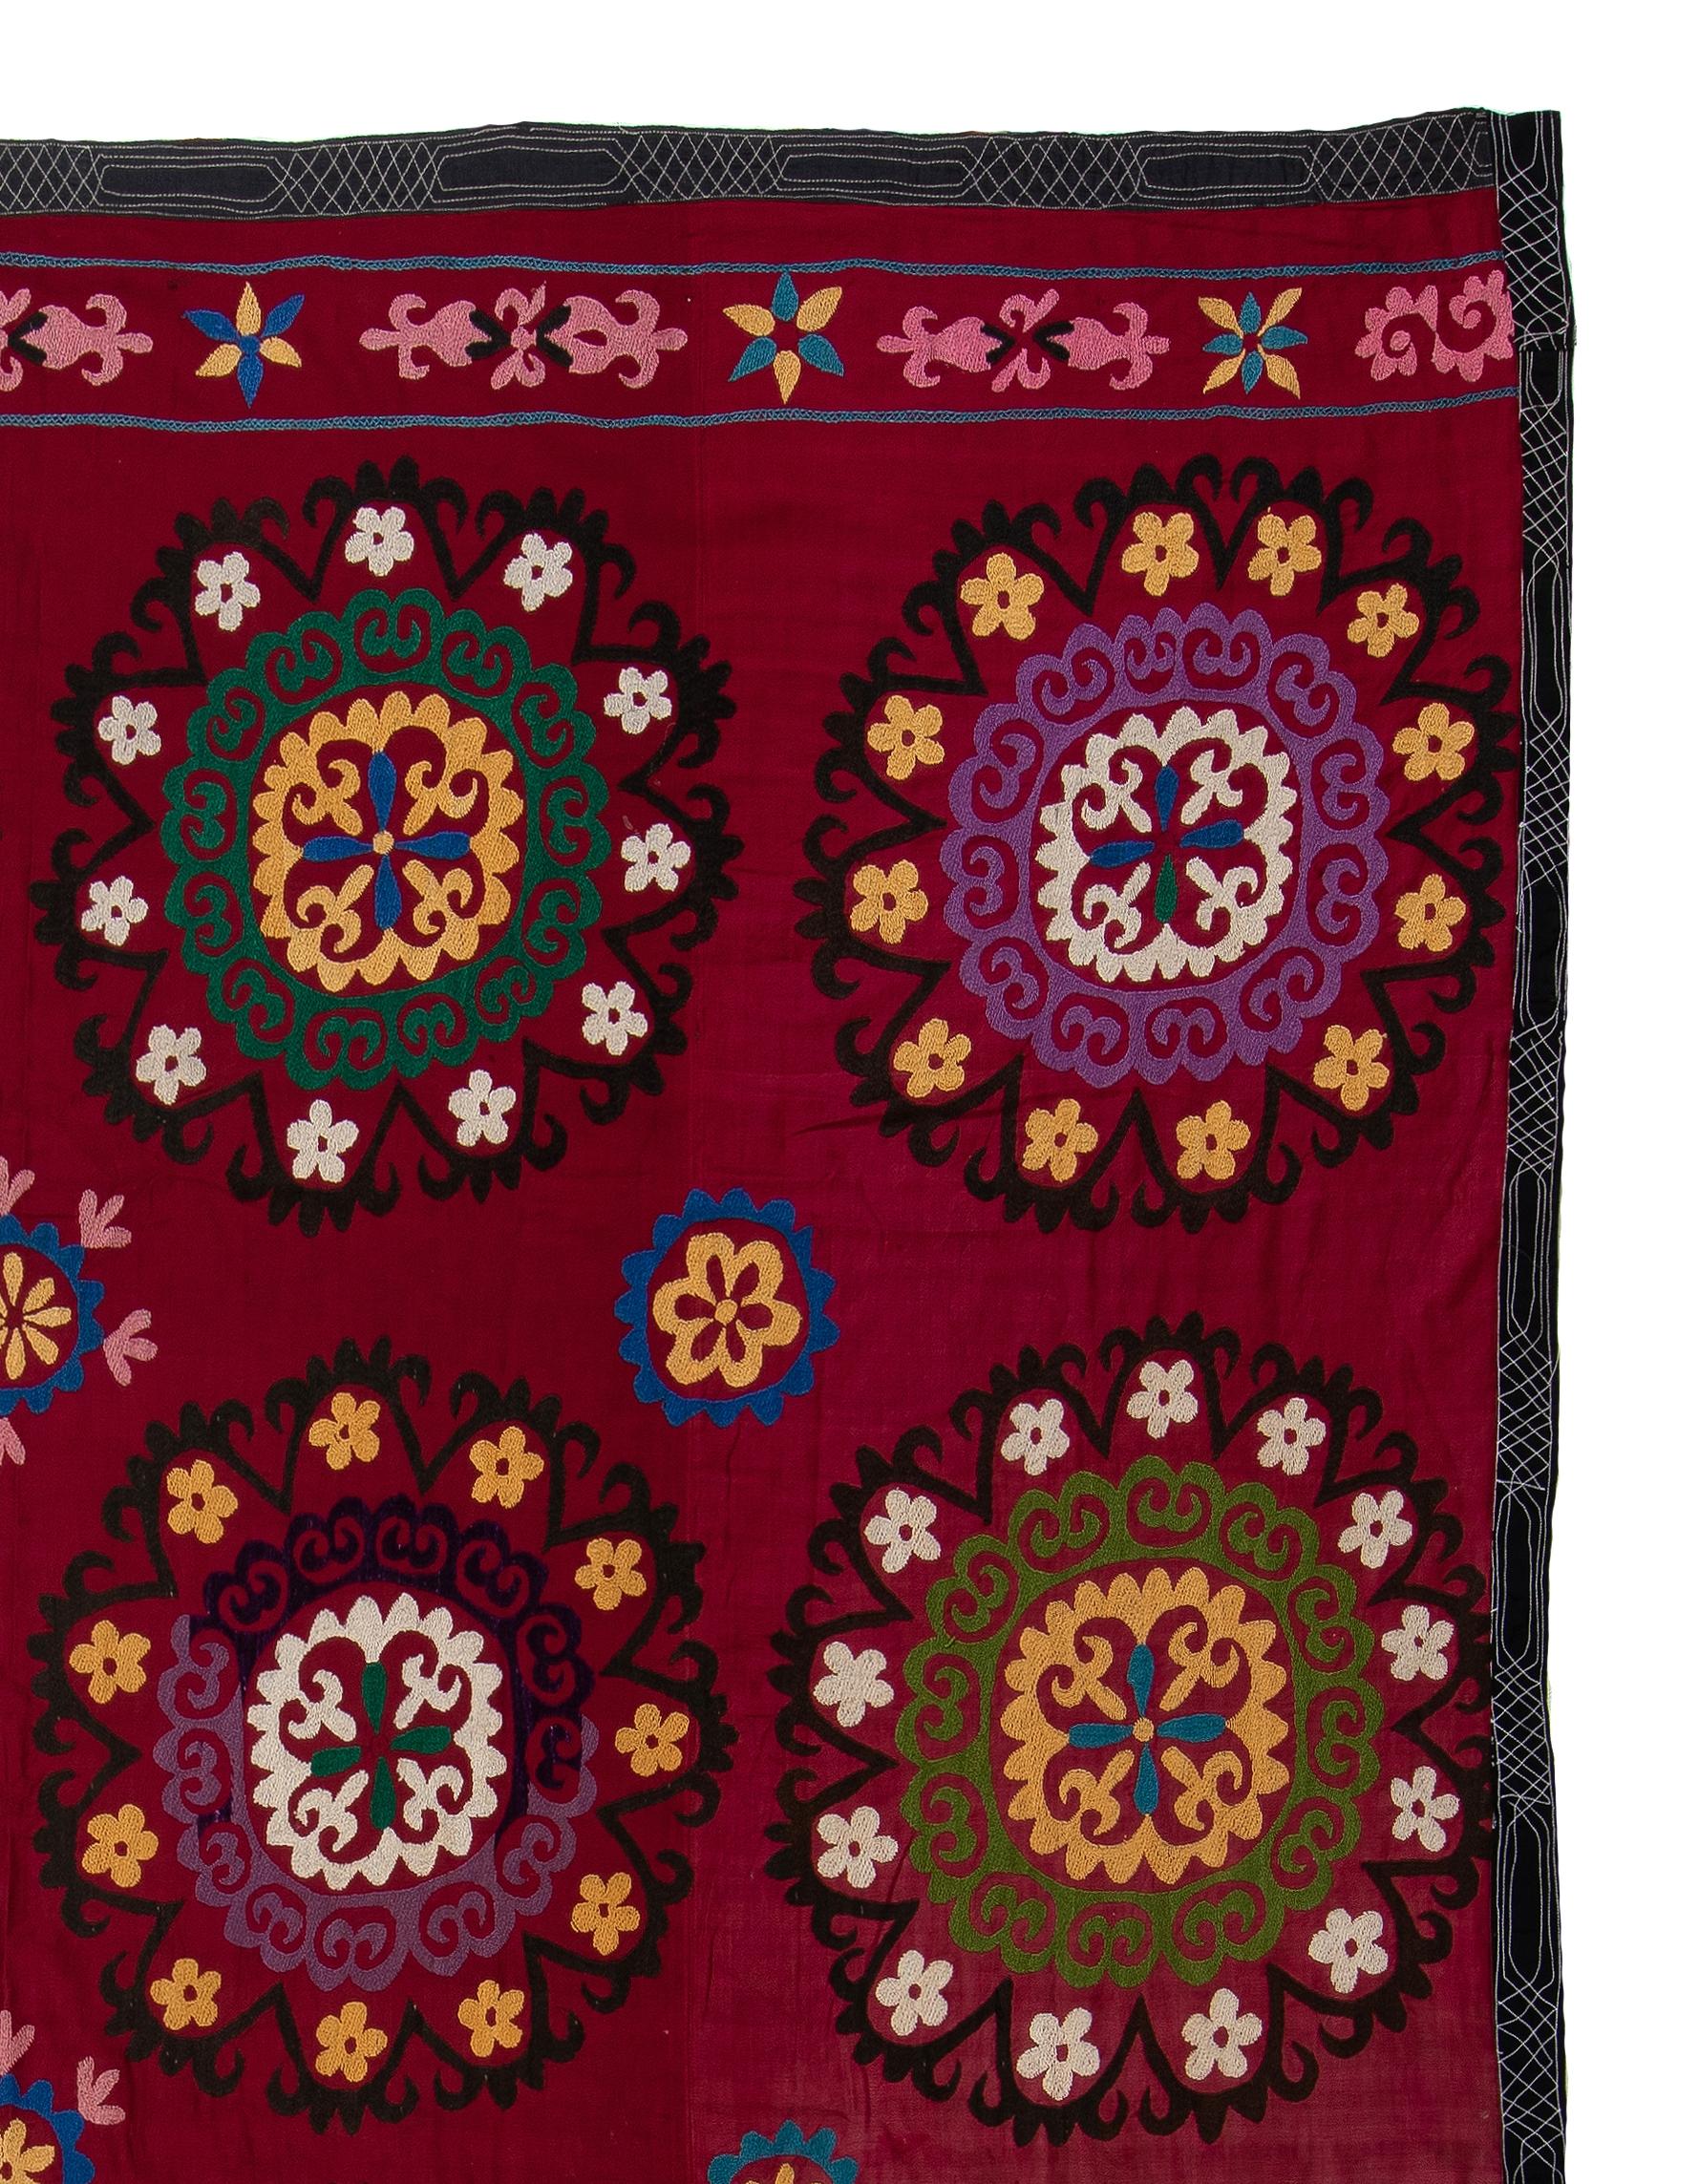 Uzbek 6.8x7.8 Ft Central Asian Suzani Textile, Embroidered Cotton & Silk Wall Hanging For Sale